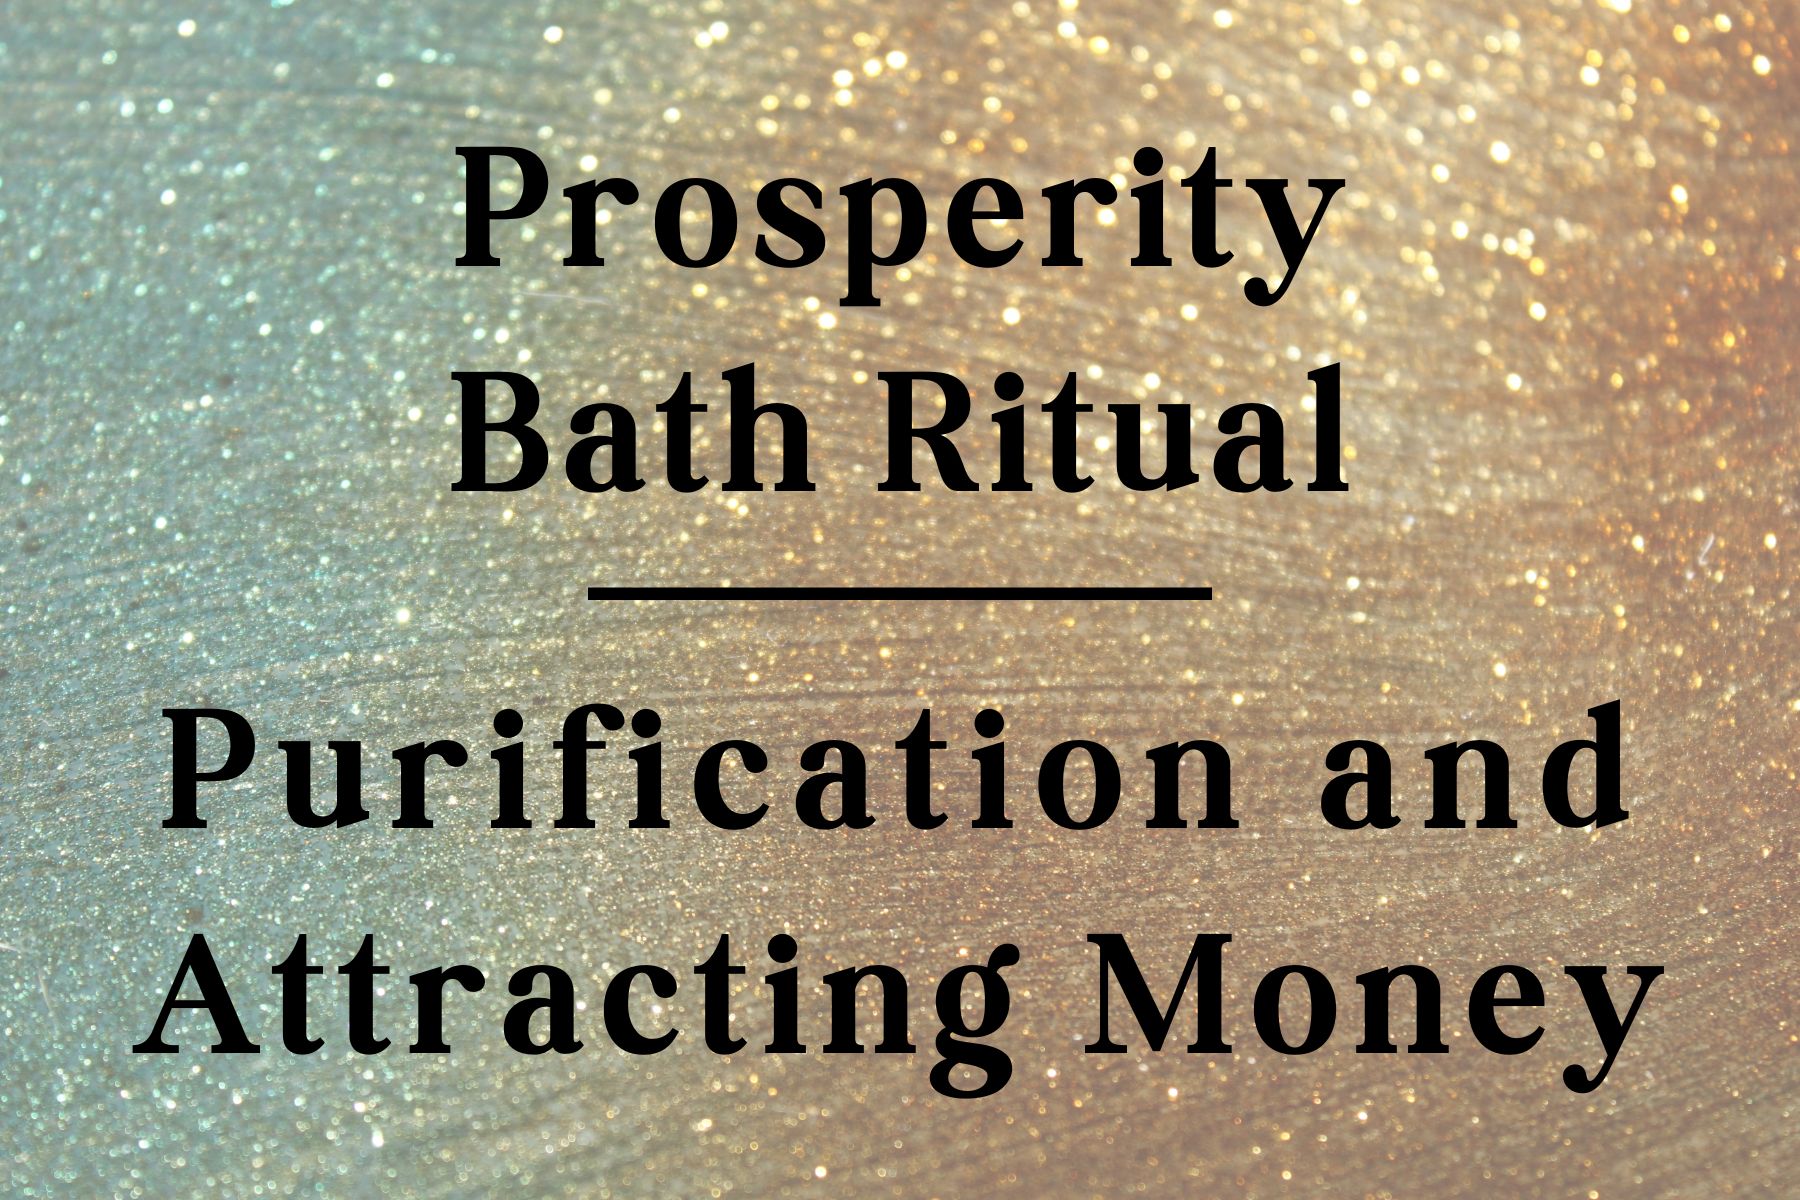 Prosperity Bath Ritual: Purification and Attracting Money